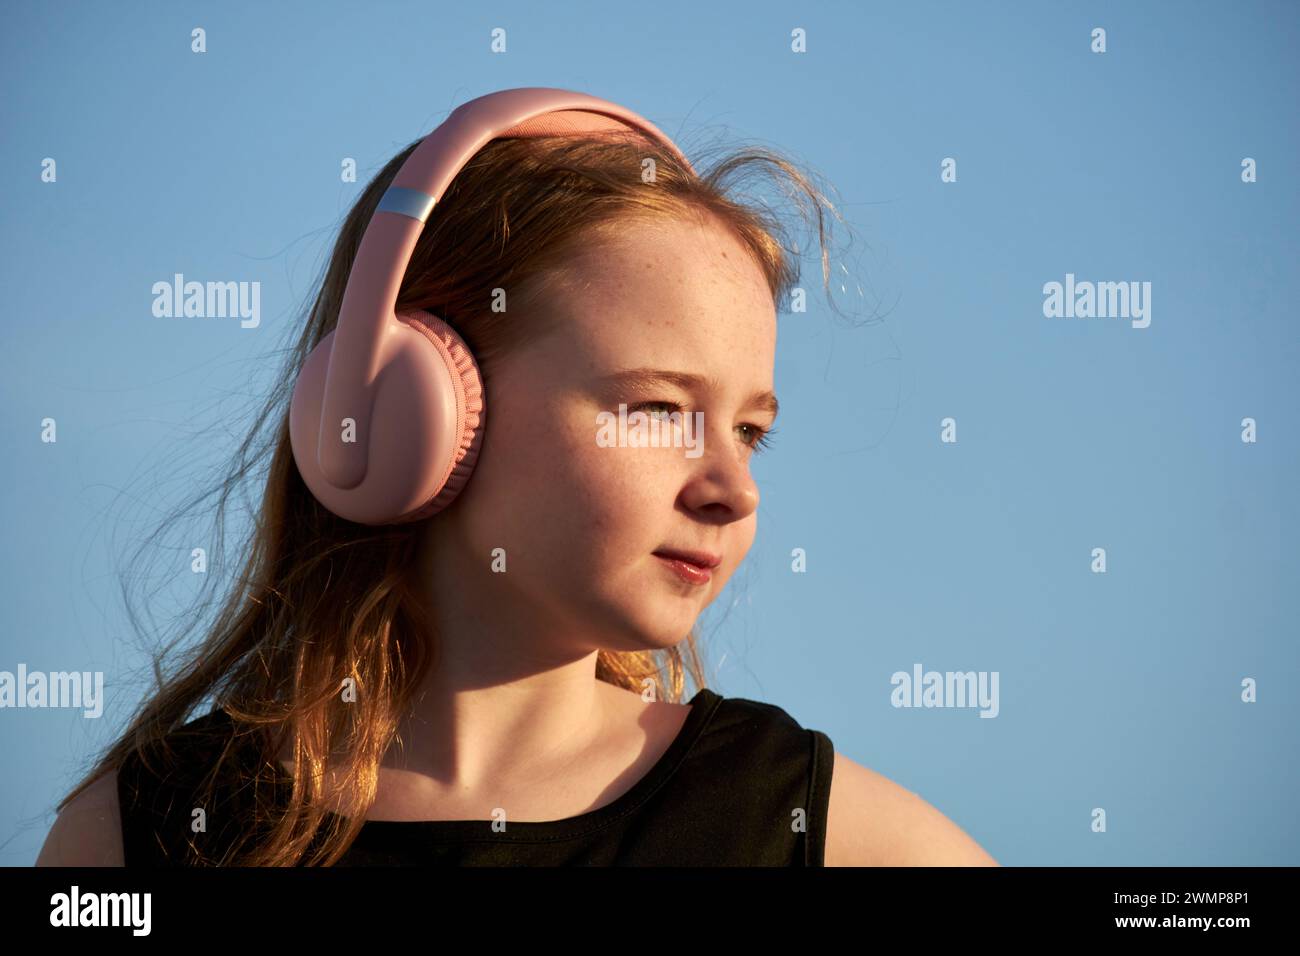 young 10 year old girl wearing headphones looking off at sunset Lanzarote, Canary Islands, spain Stock Photo